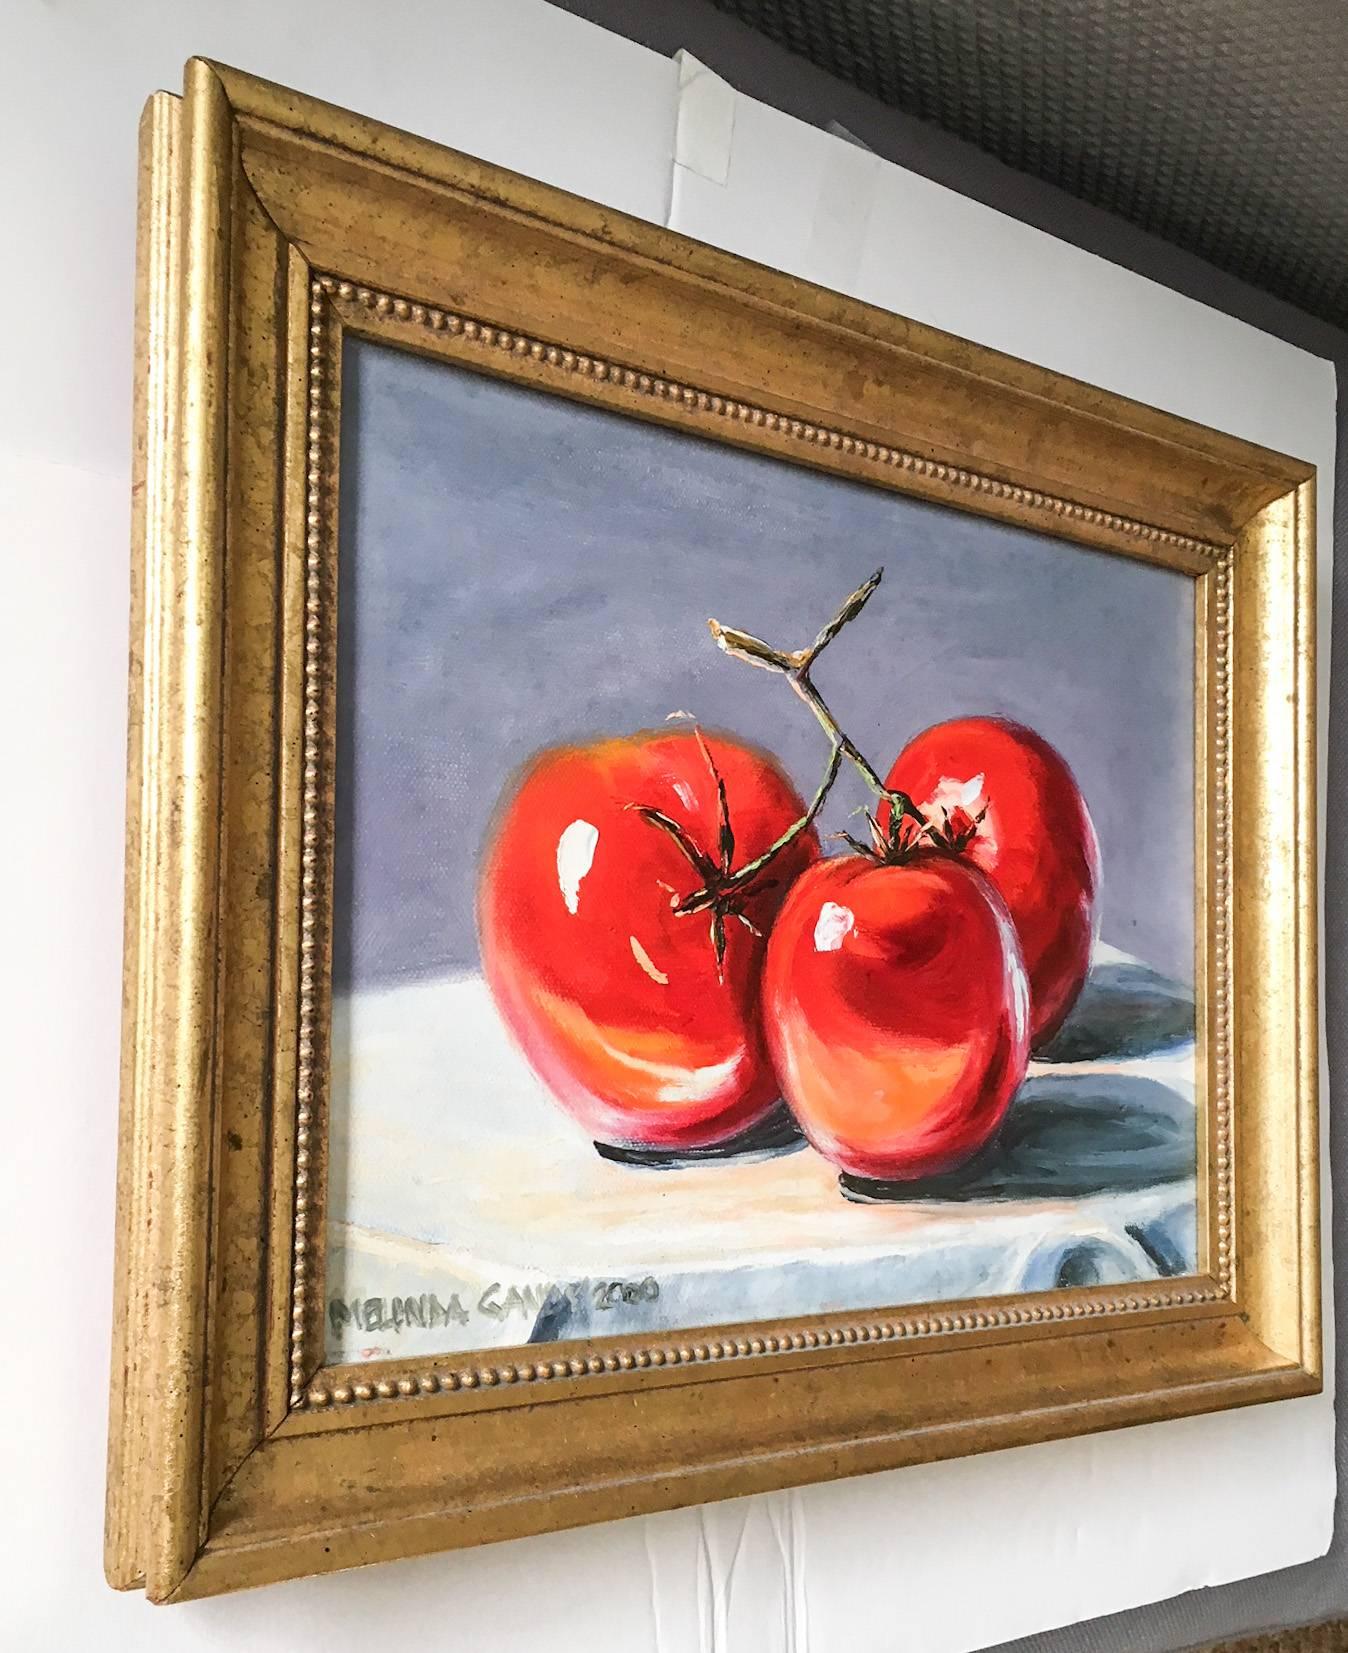 Delightful acrylic on canvas painting of three red tomatoes attached to their stem on a tablecloth against a purple-grey background by artist Melinda Gandy, 2000. Professionally framed in an Italian gilded popular wood frame with gold beaded detail.